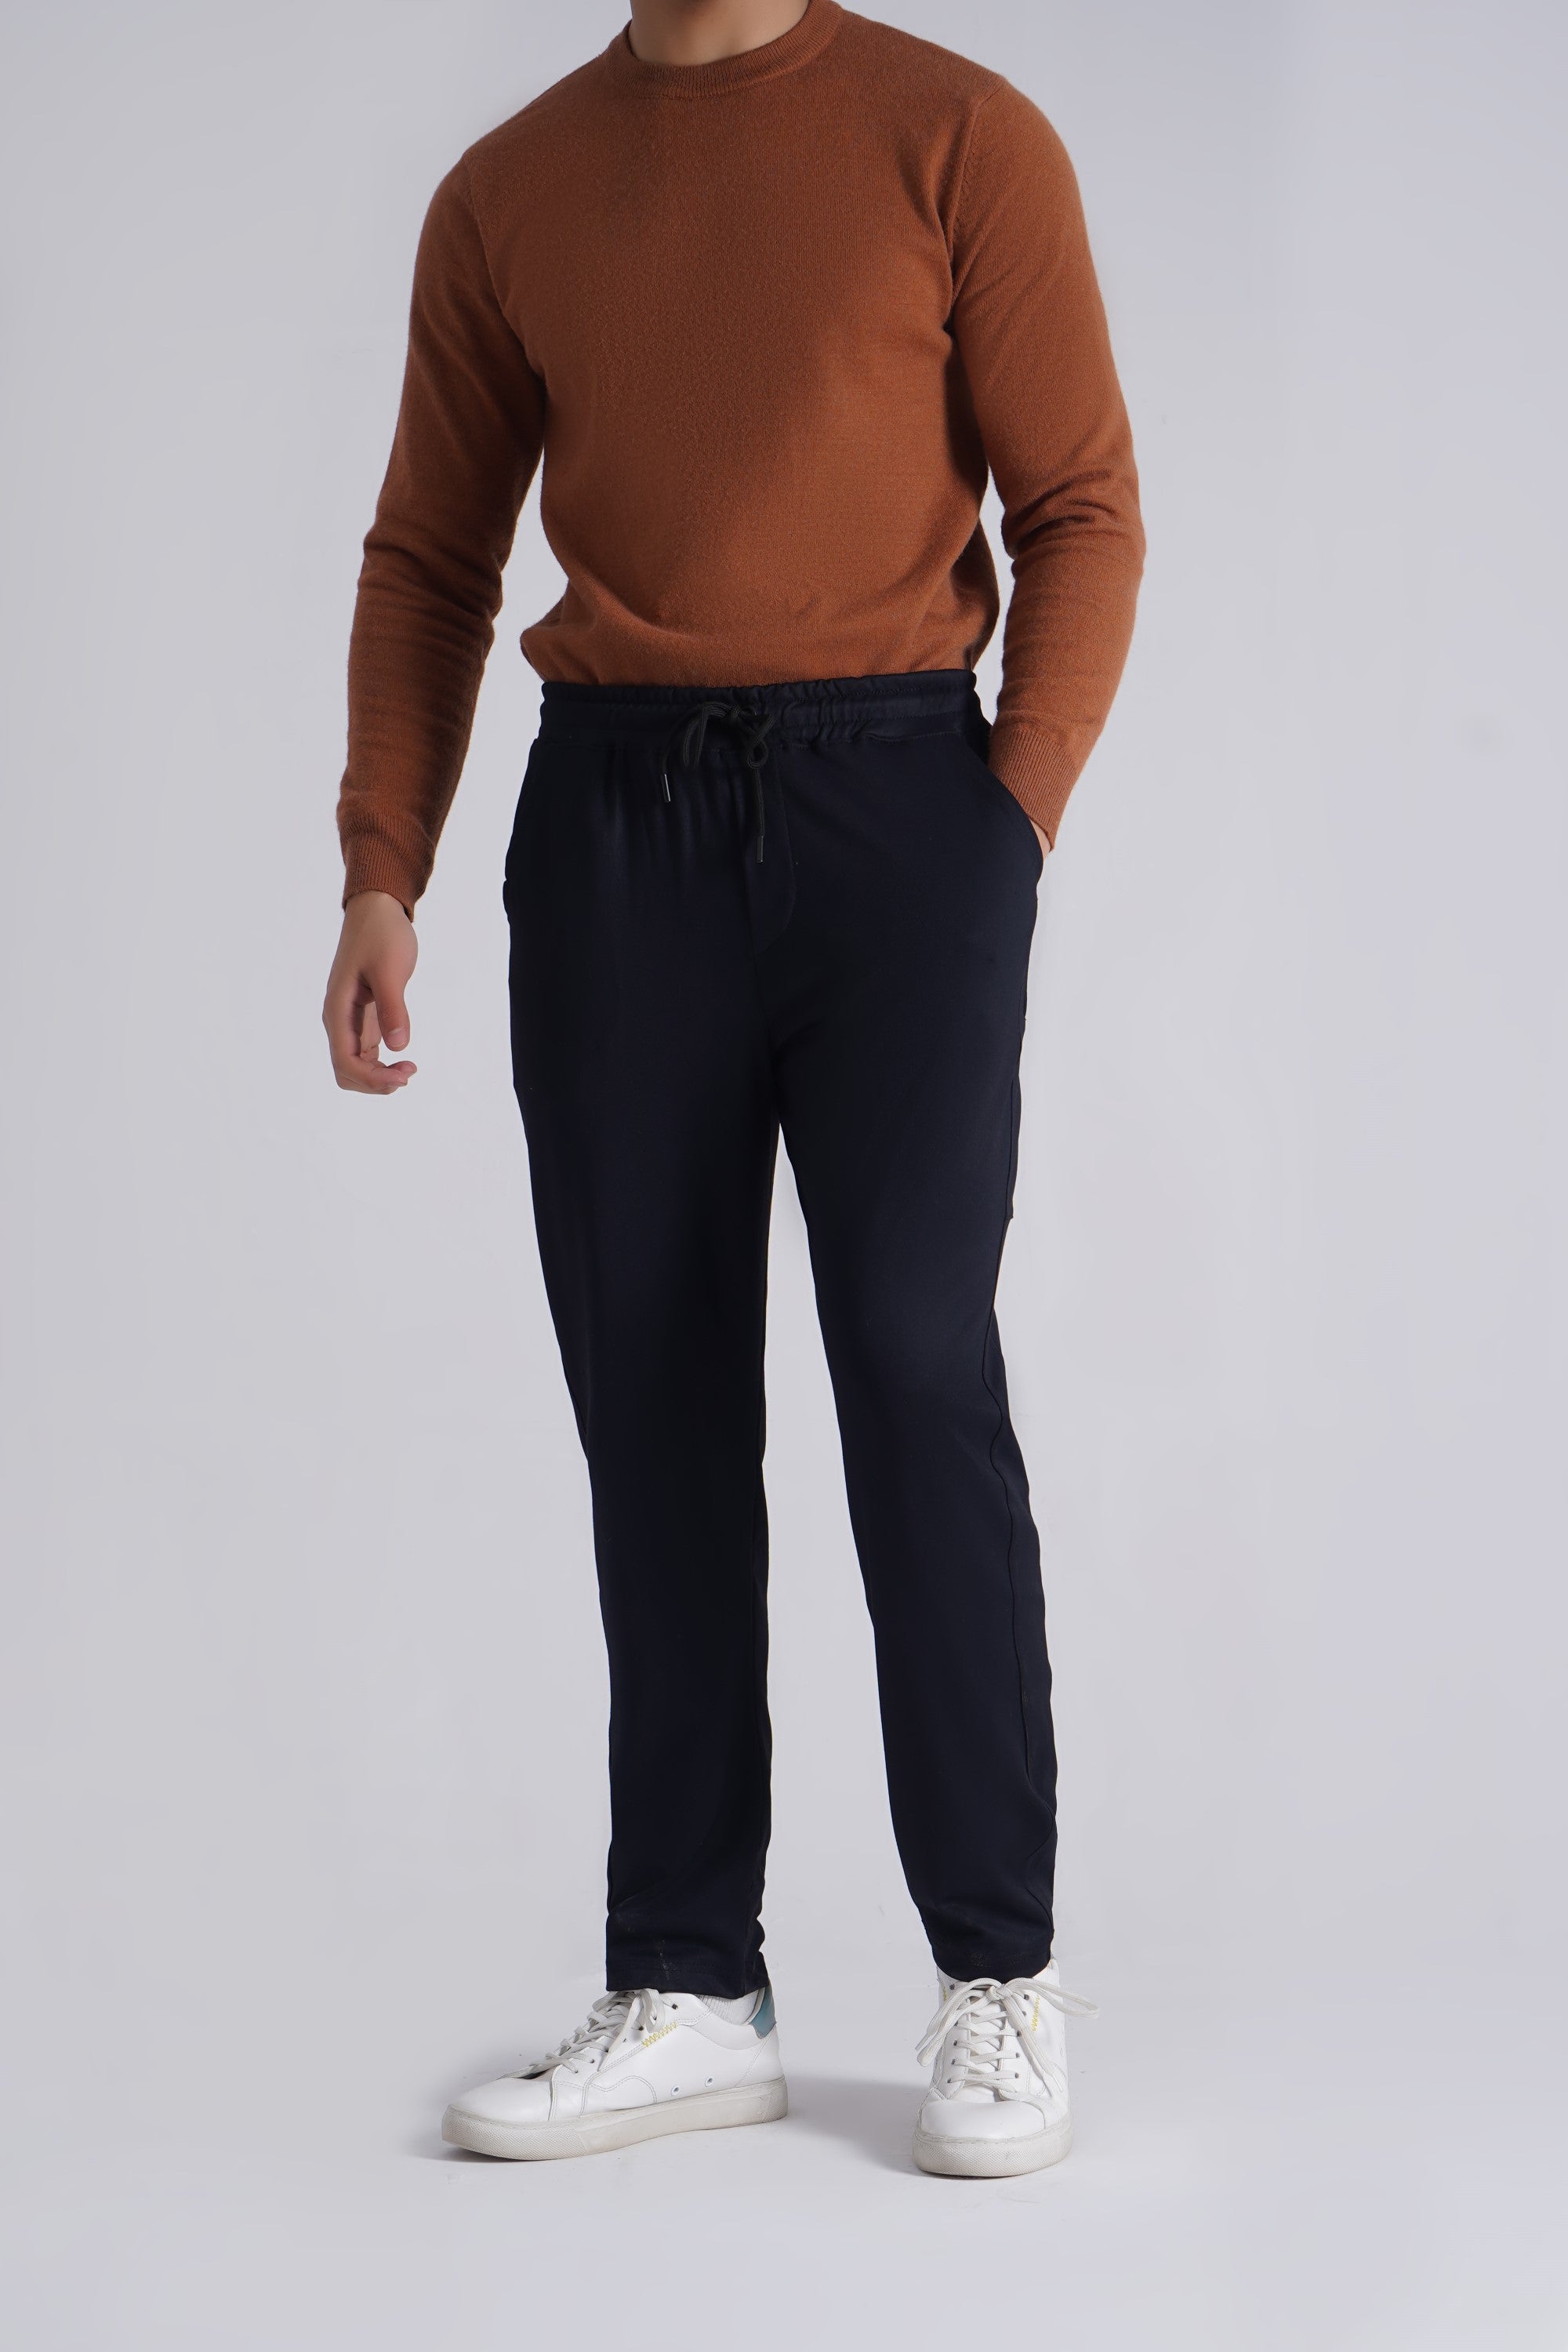 Black Dry Fit Trousers